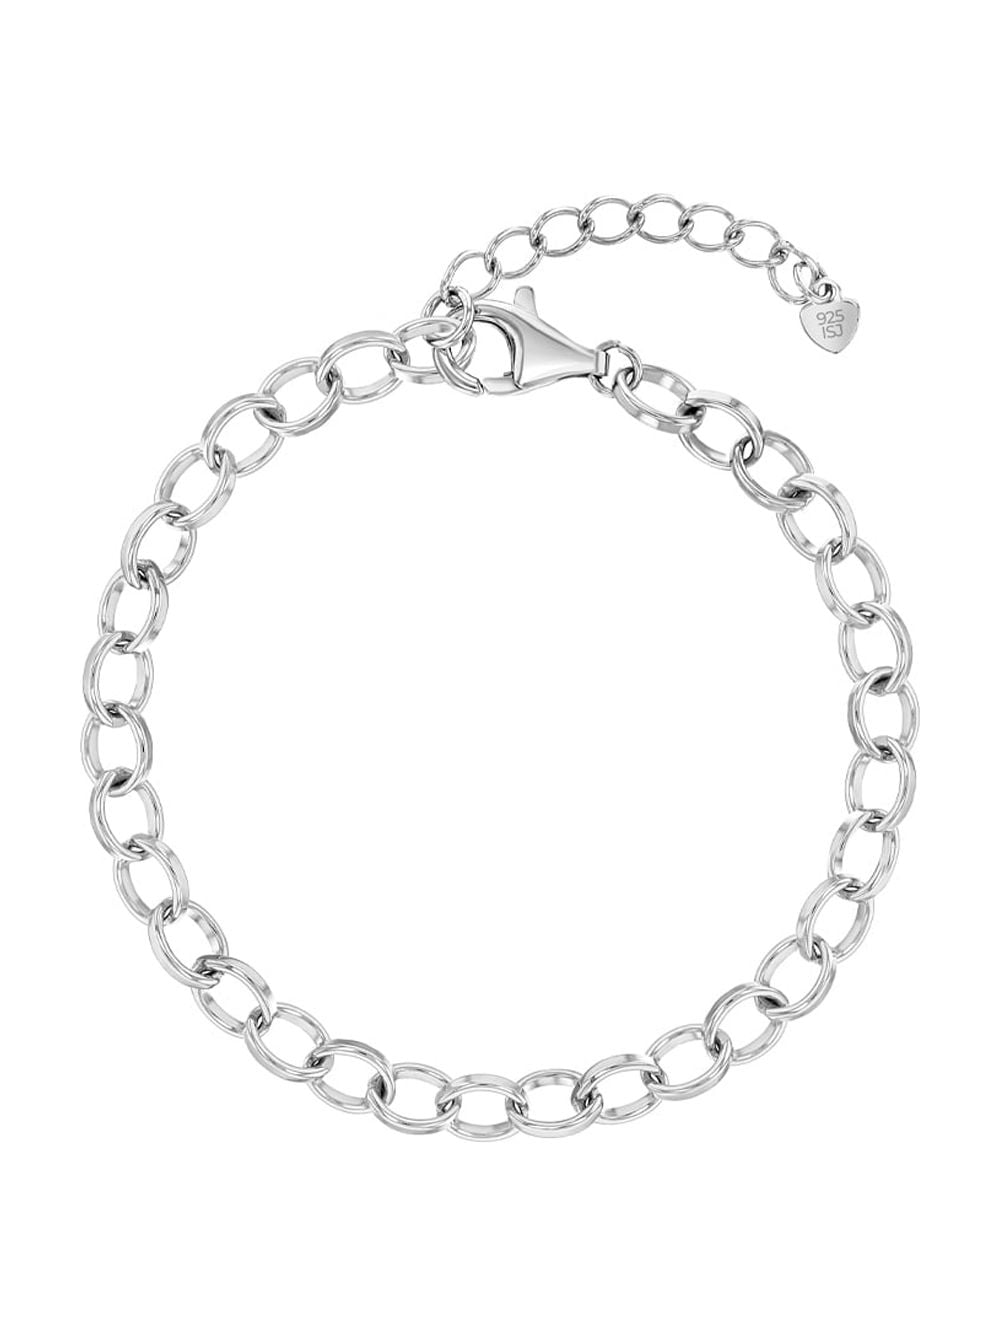 JEWELS Authentic 925 Sterling Silver Tennis Bracelet Clear Cubic Zirconia Silver  Bangle Party Jewelry Men Hand Chain SB61 - Walmart.com